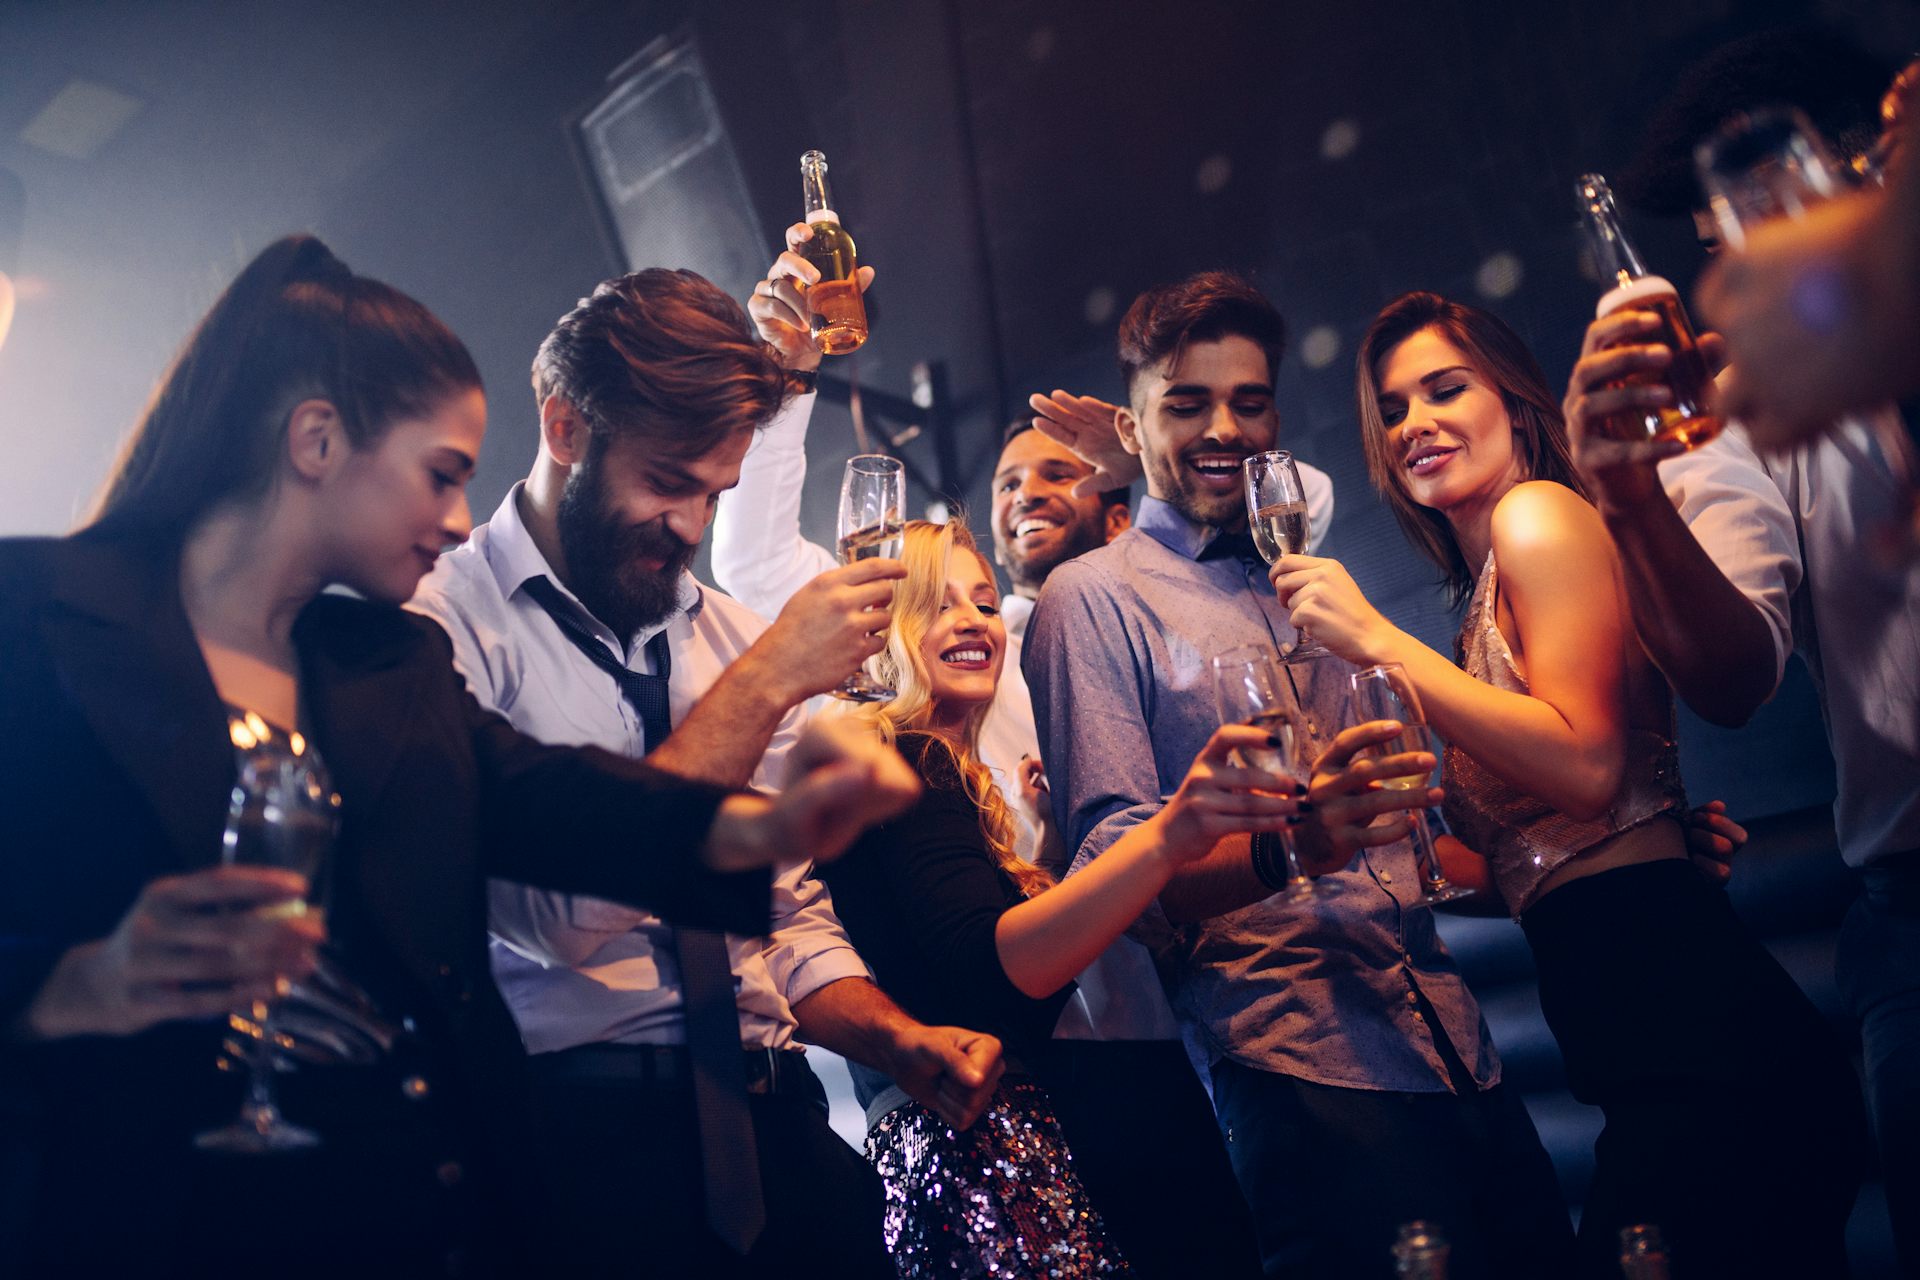 Groping, grinding, grabbing new research on nightclubs finds men do it often but know its wrong picture